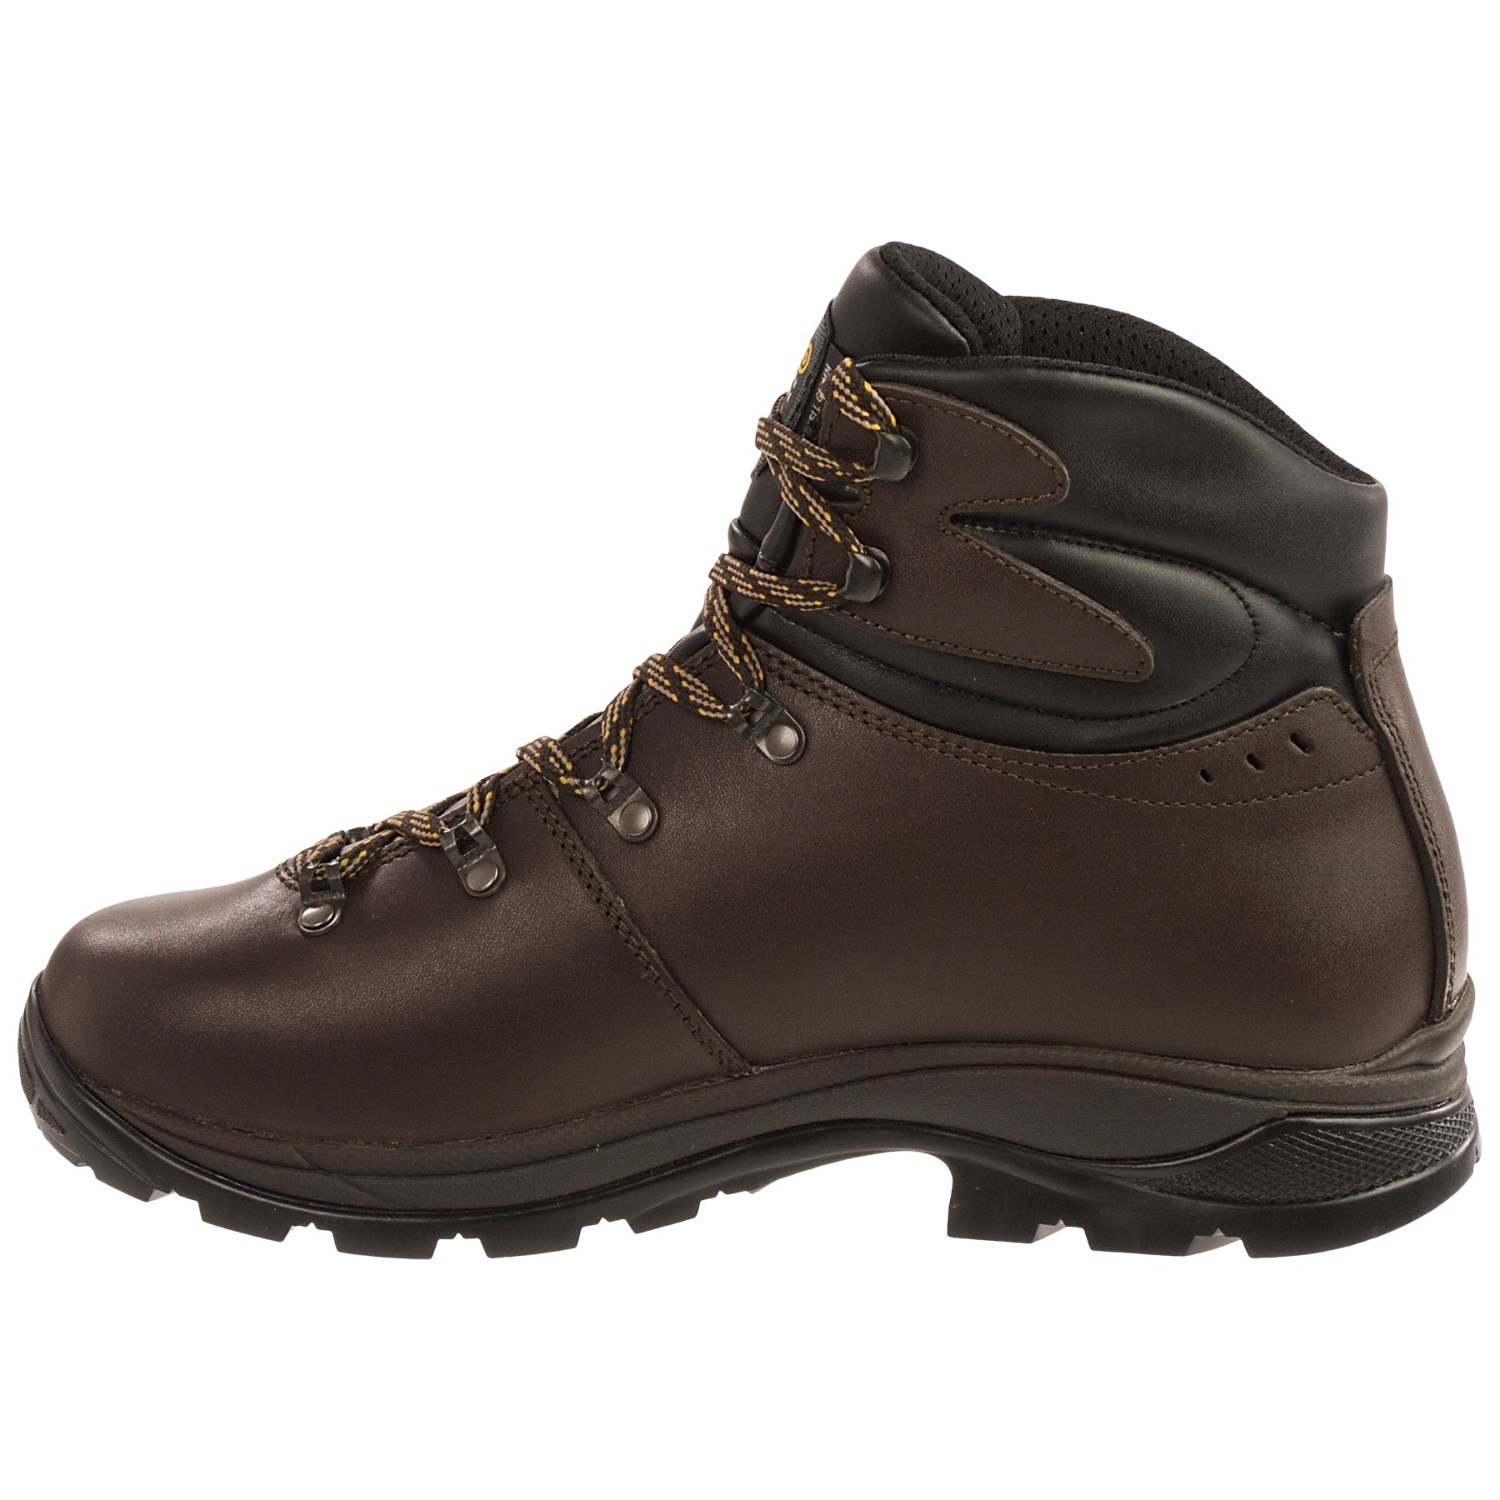 gore tex boots asolo scafell gore-tex® hiking boots - waterproof, leather (for men) BMHWNMX